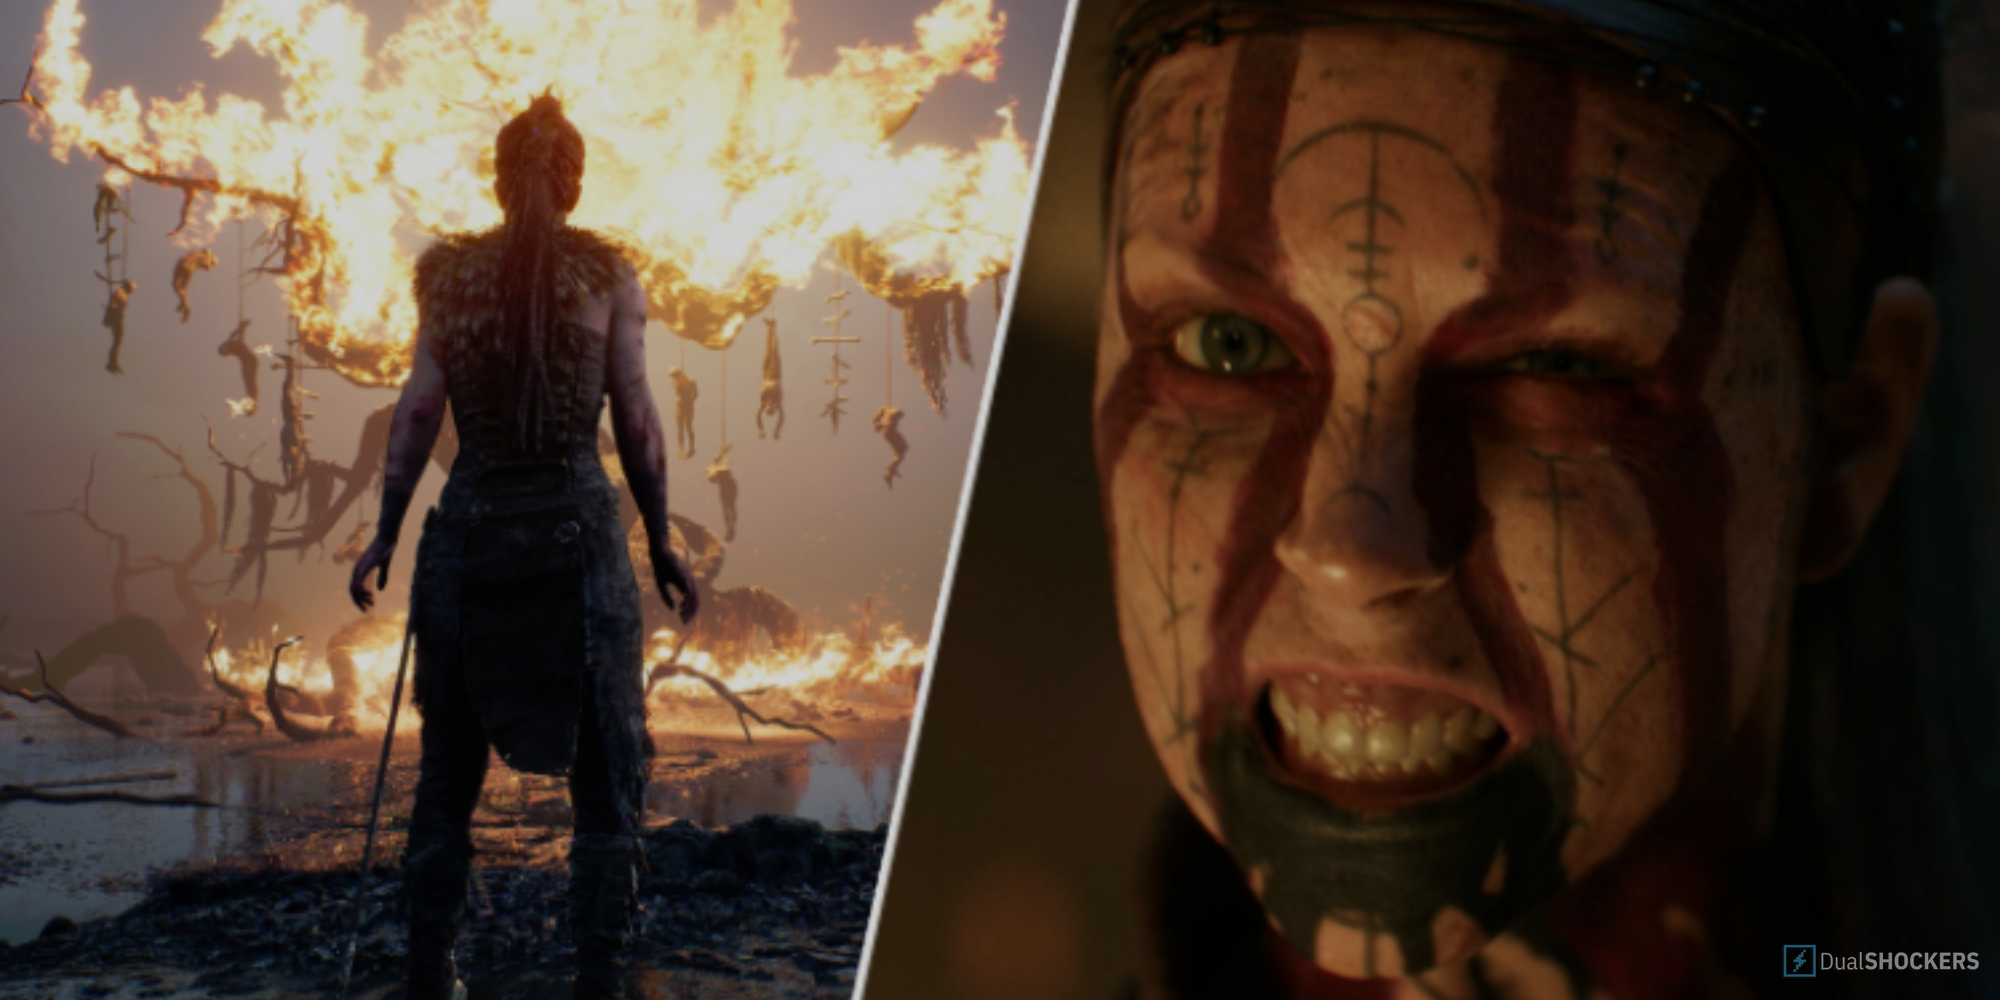 Hellblade 2's Melina Juergens Wants To Make The Mental Health Community 